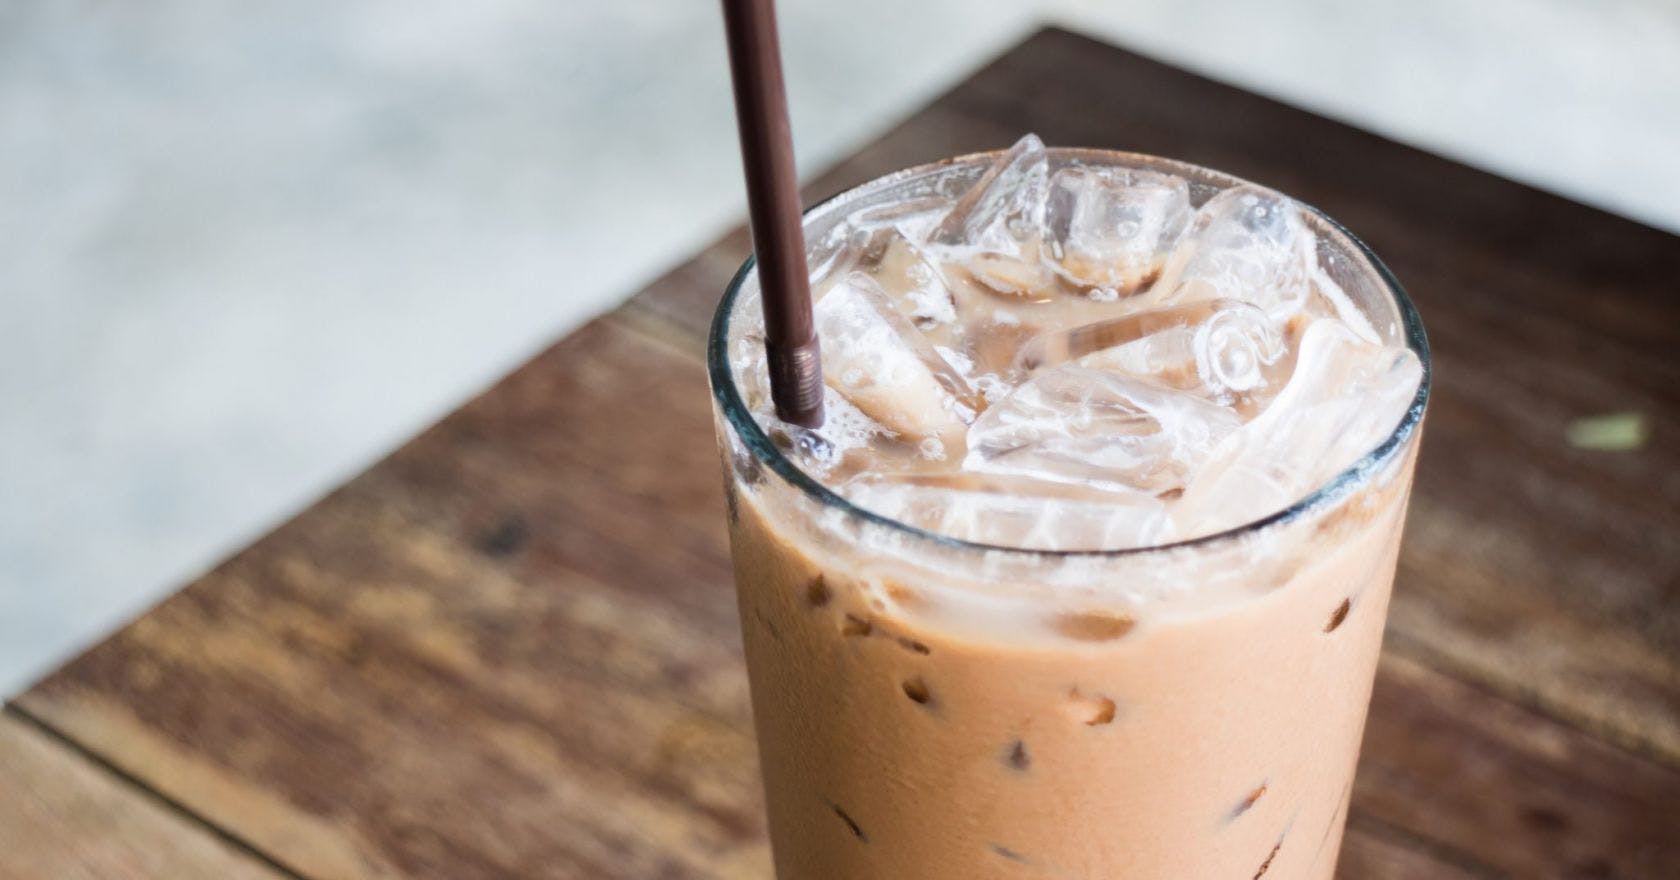 Iced coffee recipes to make at home